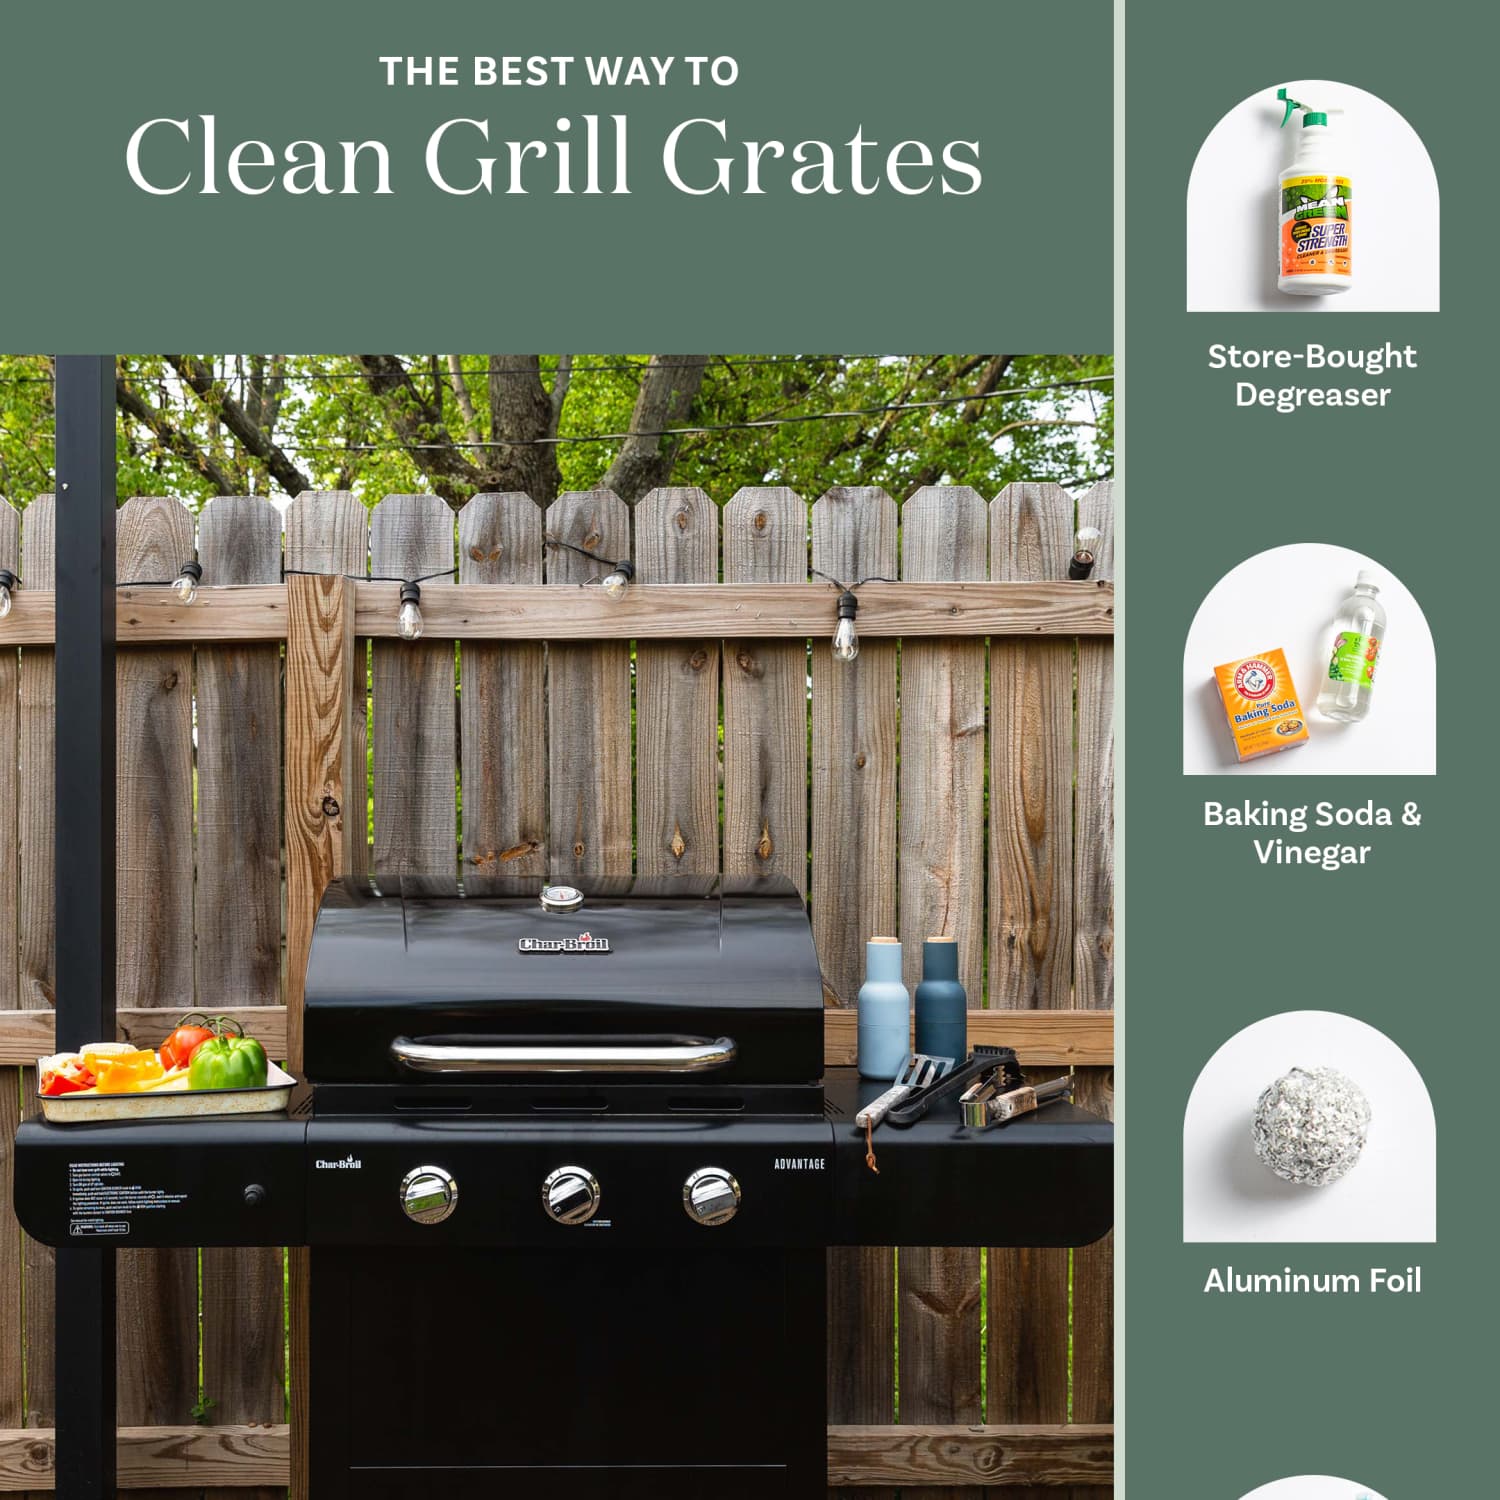 How To Clean A Stainless Steel Grill: Here's The Best Way